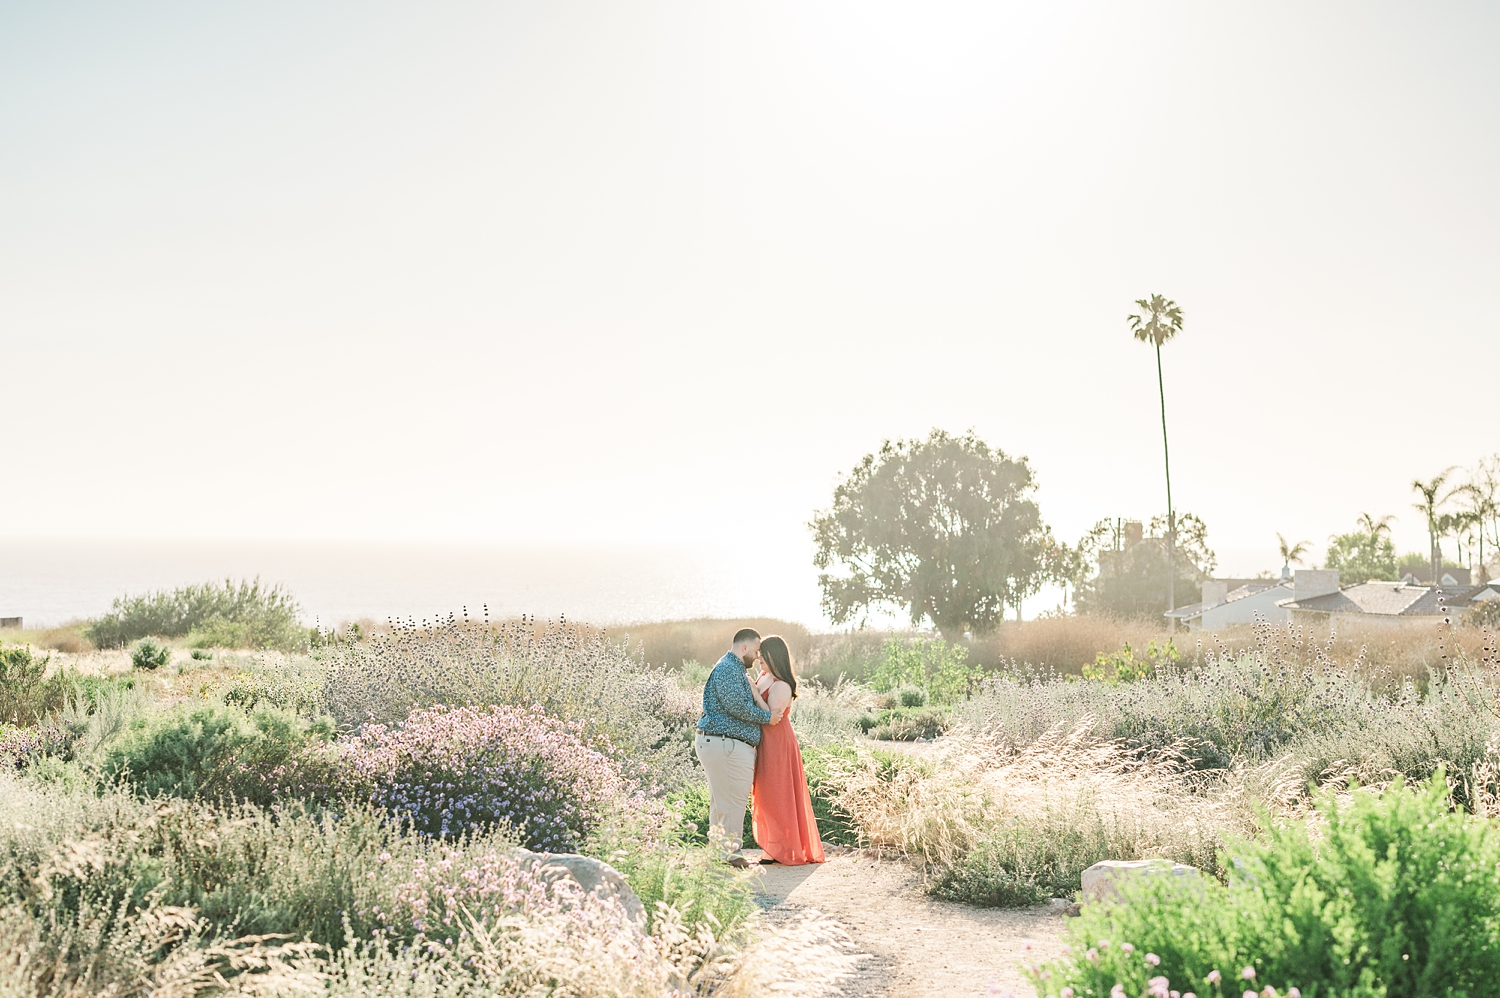 Beach Cliffs Engagement Session at Sunset | Nataly Hernandez Photography | Edwin and Susana-29.jpg